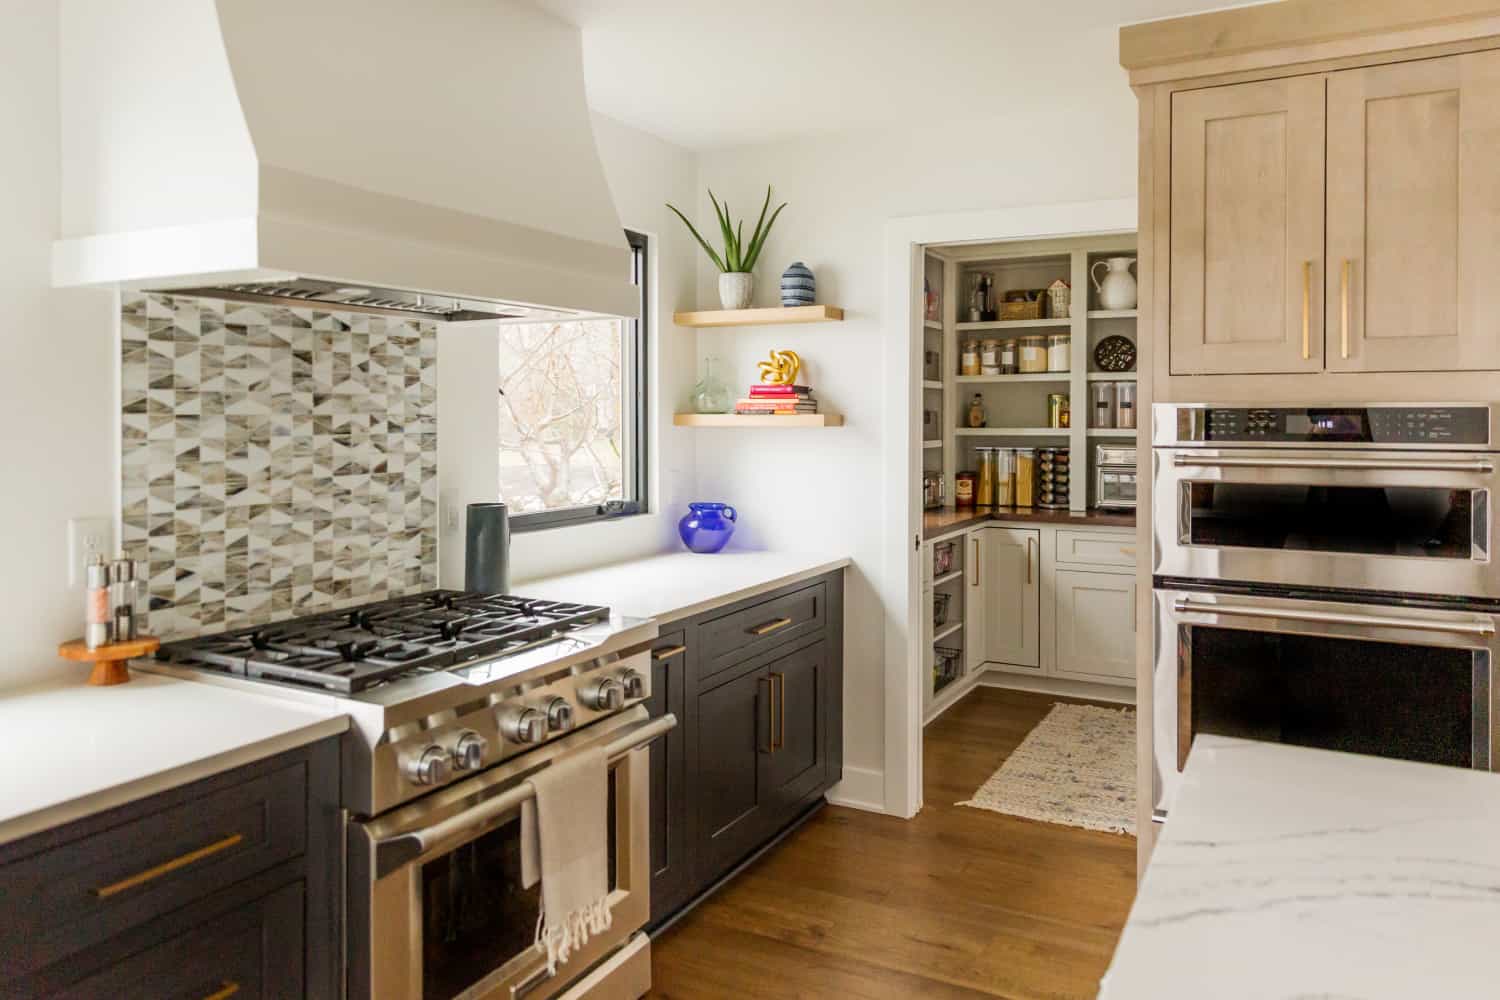 Nicholas Design Build | A remodeled kitchen with stainless steel appliances and wood cabinets.